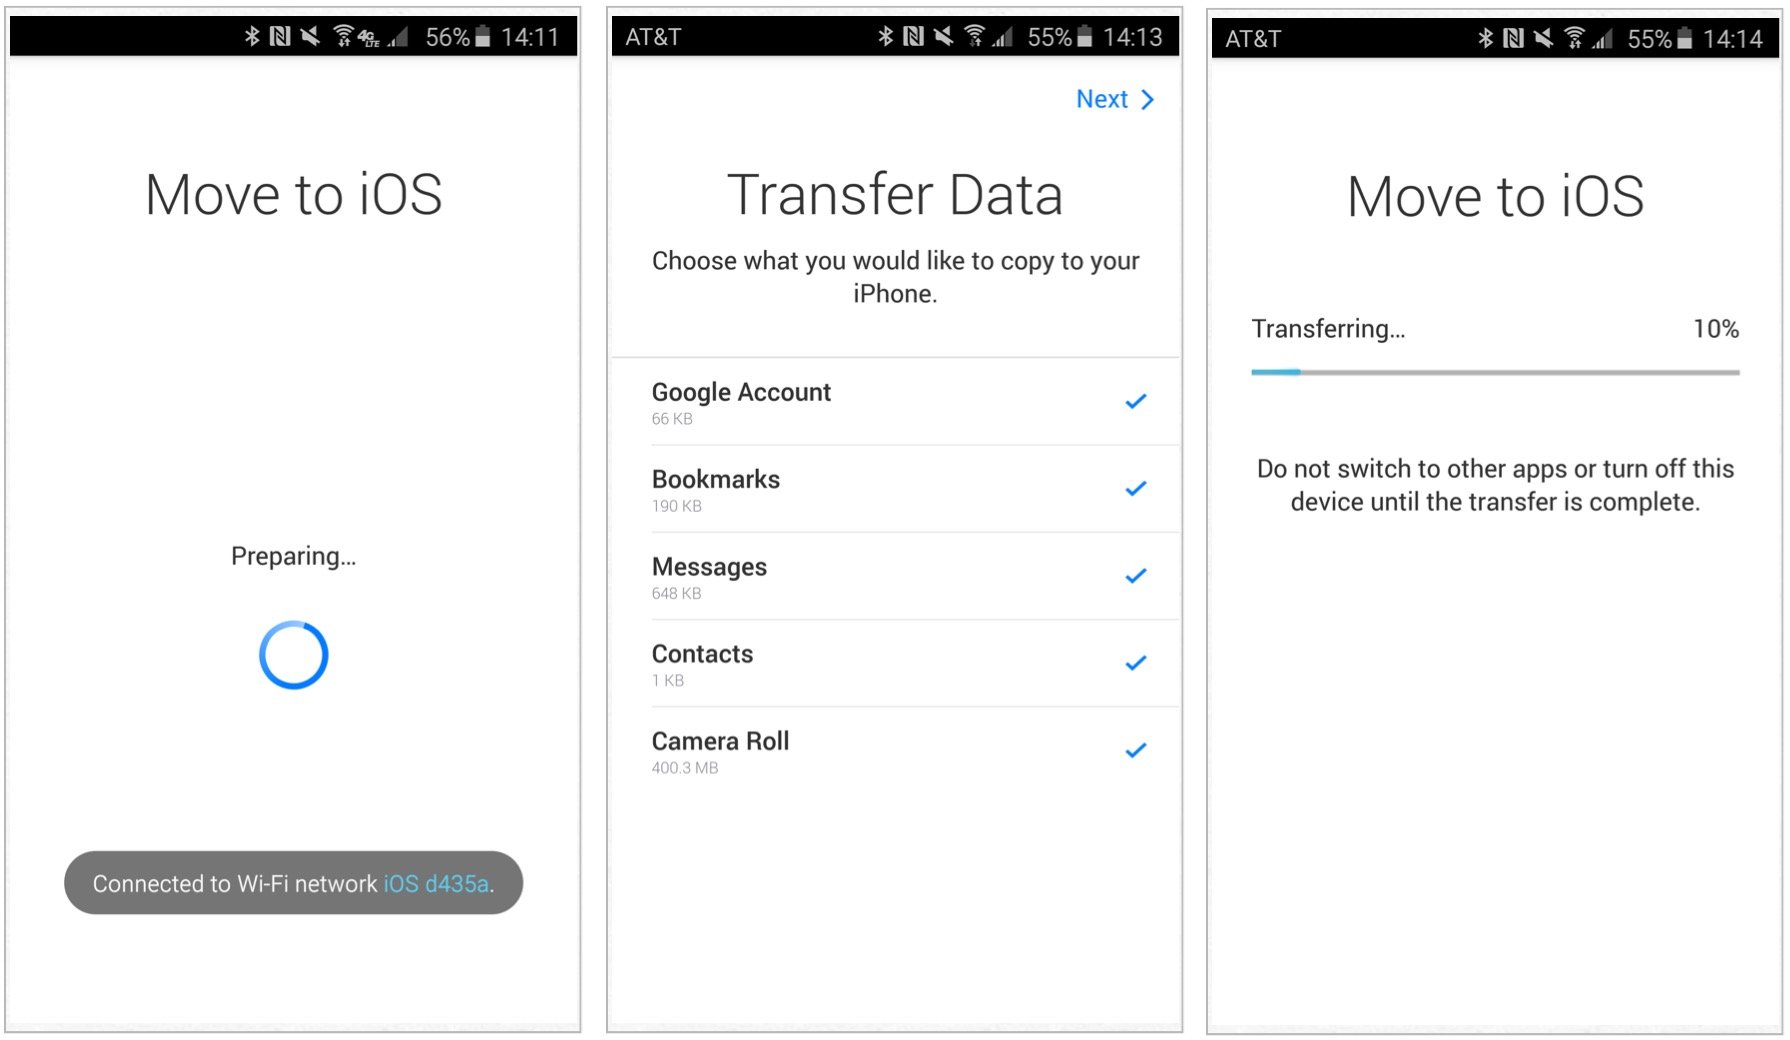 To move your data from Android to iPhone or iPad with Move to iOS, follow the directions that remain on the screen.